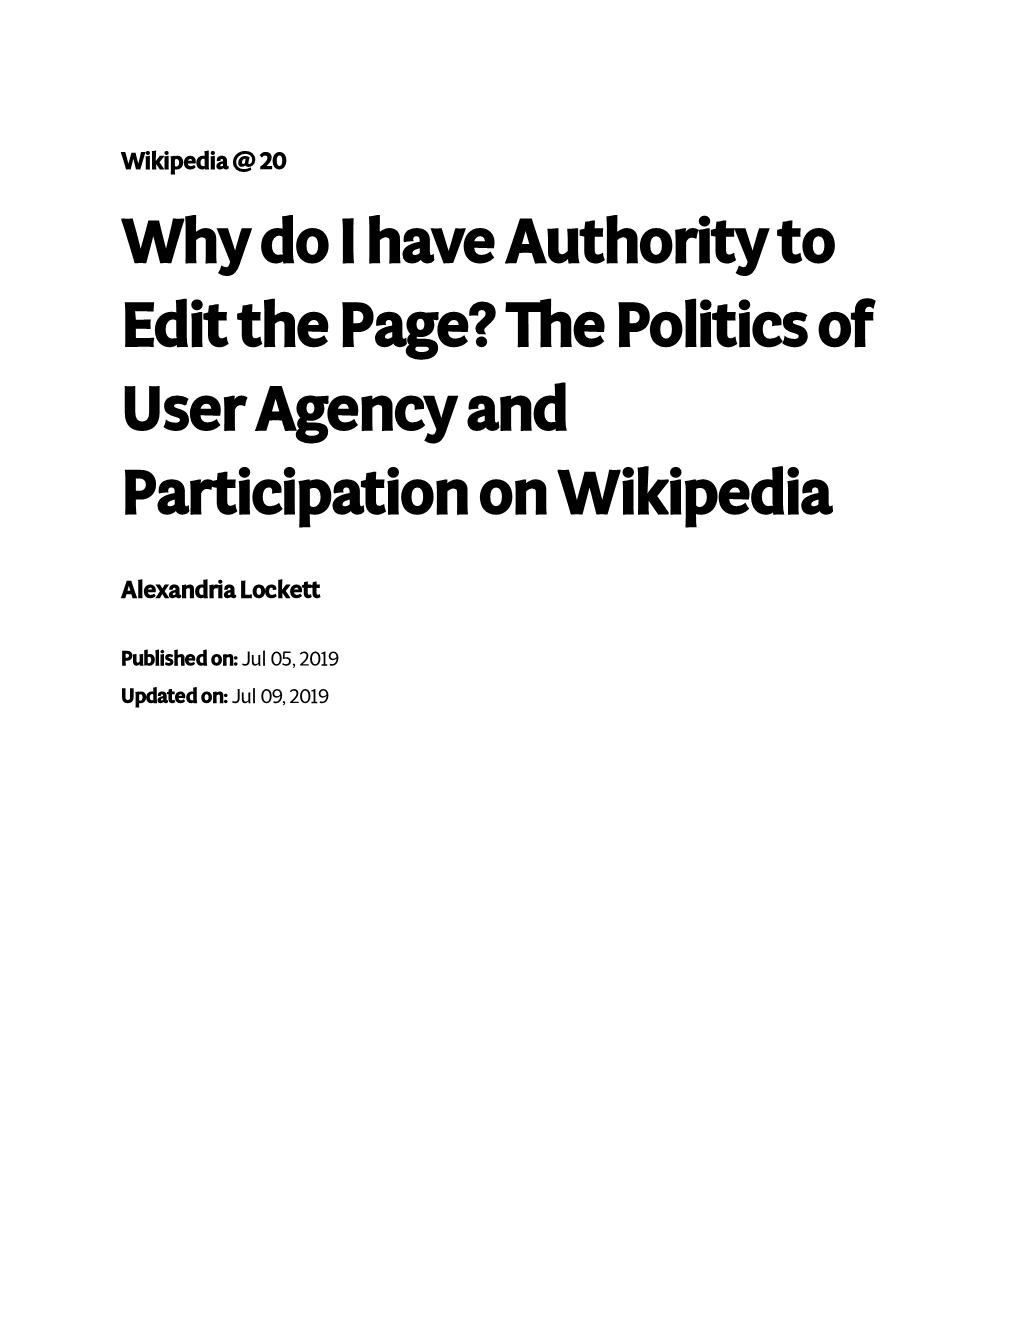 The Politics of User Agency and Participation on Wikipedia